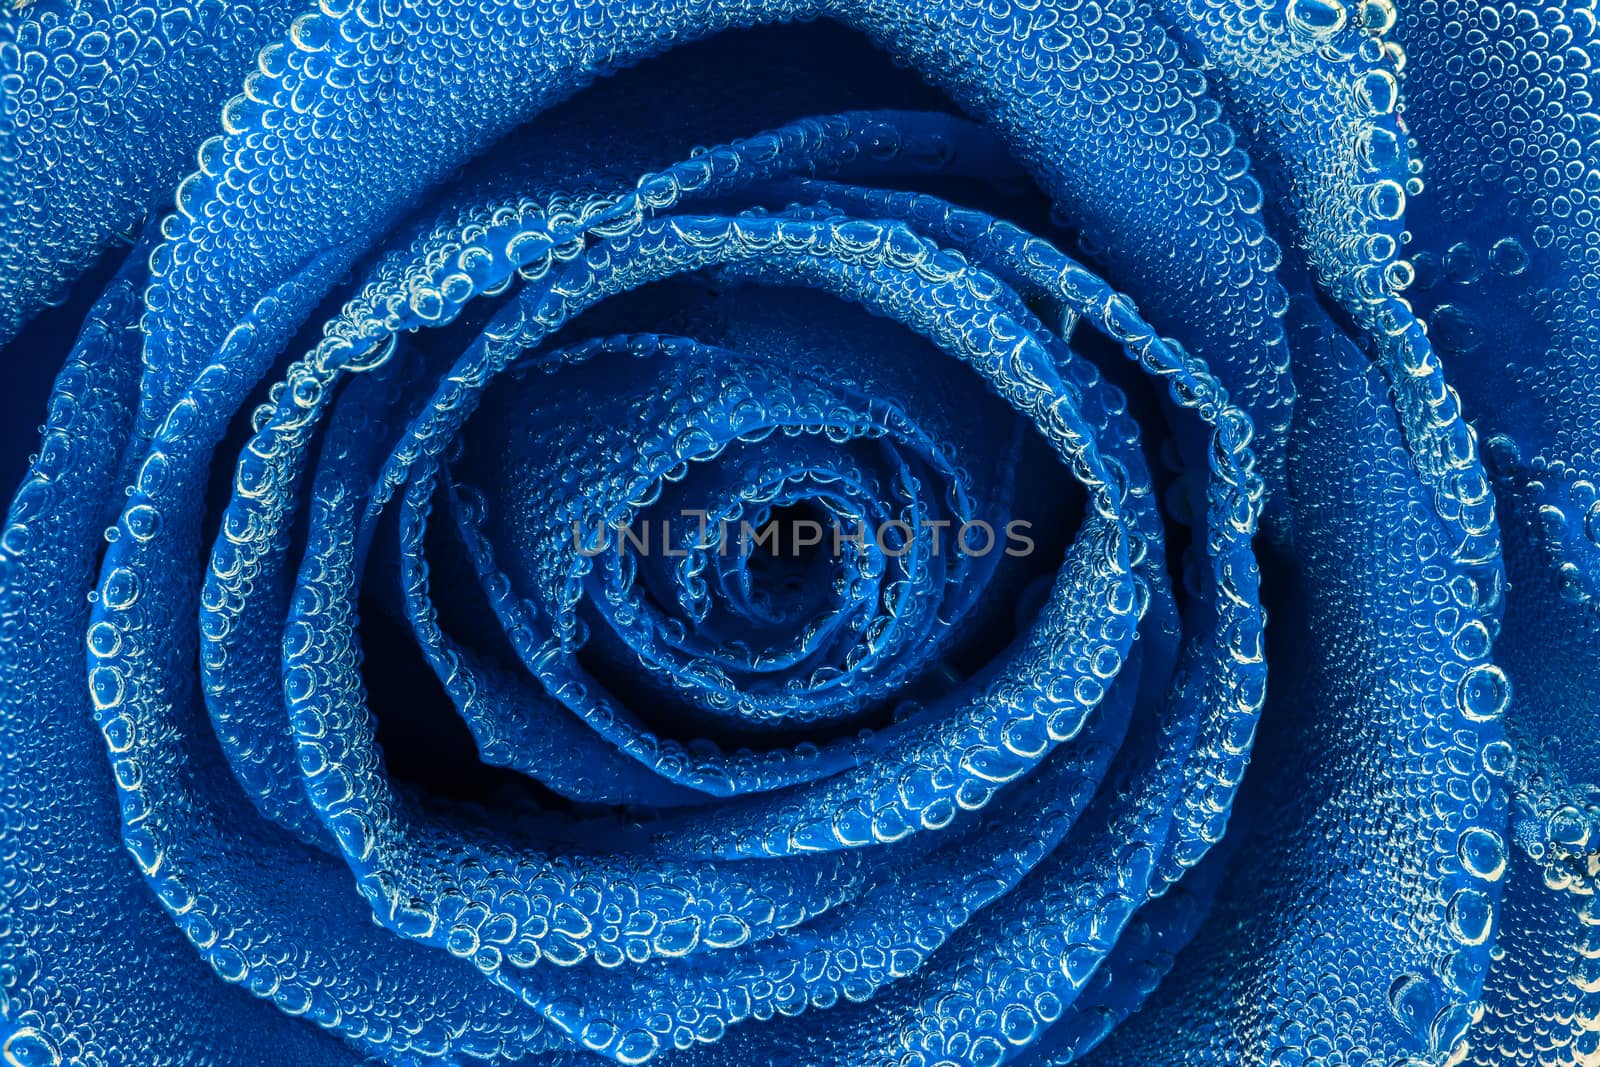 blue rose under air bubbles close-up edgeless view by z1b